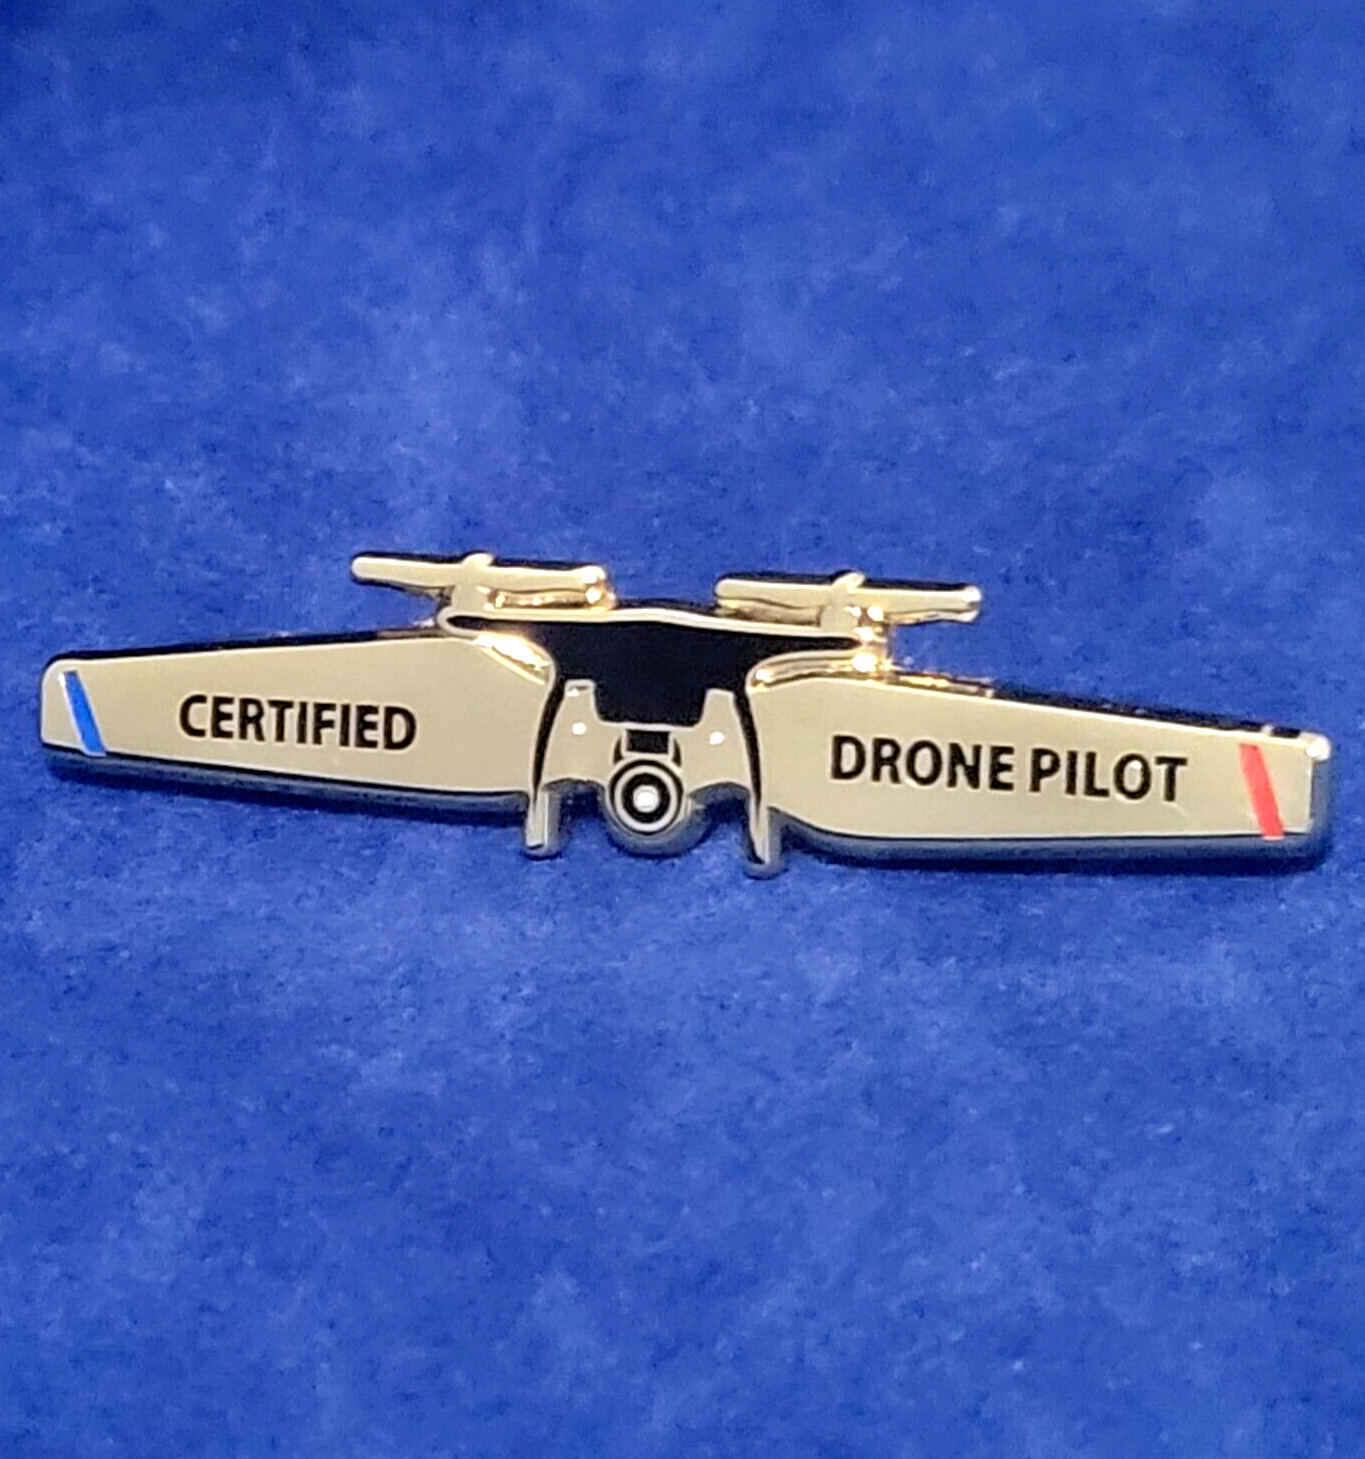 DRONE PILOT BLADE WING PIN, Item #1503: 10K Gold plated finish